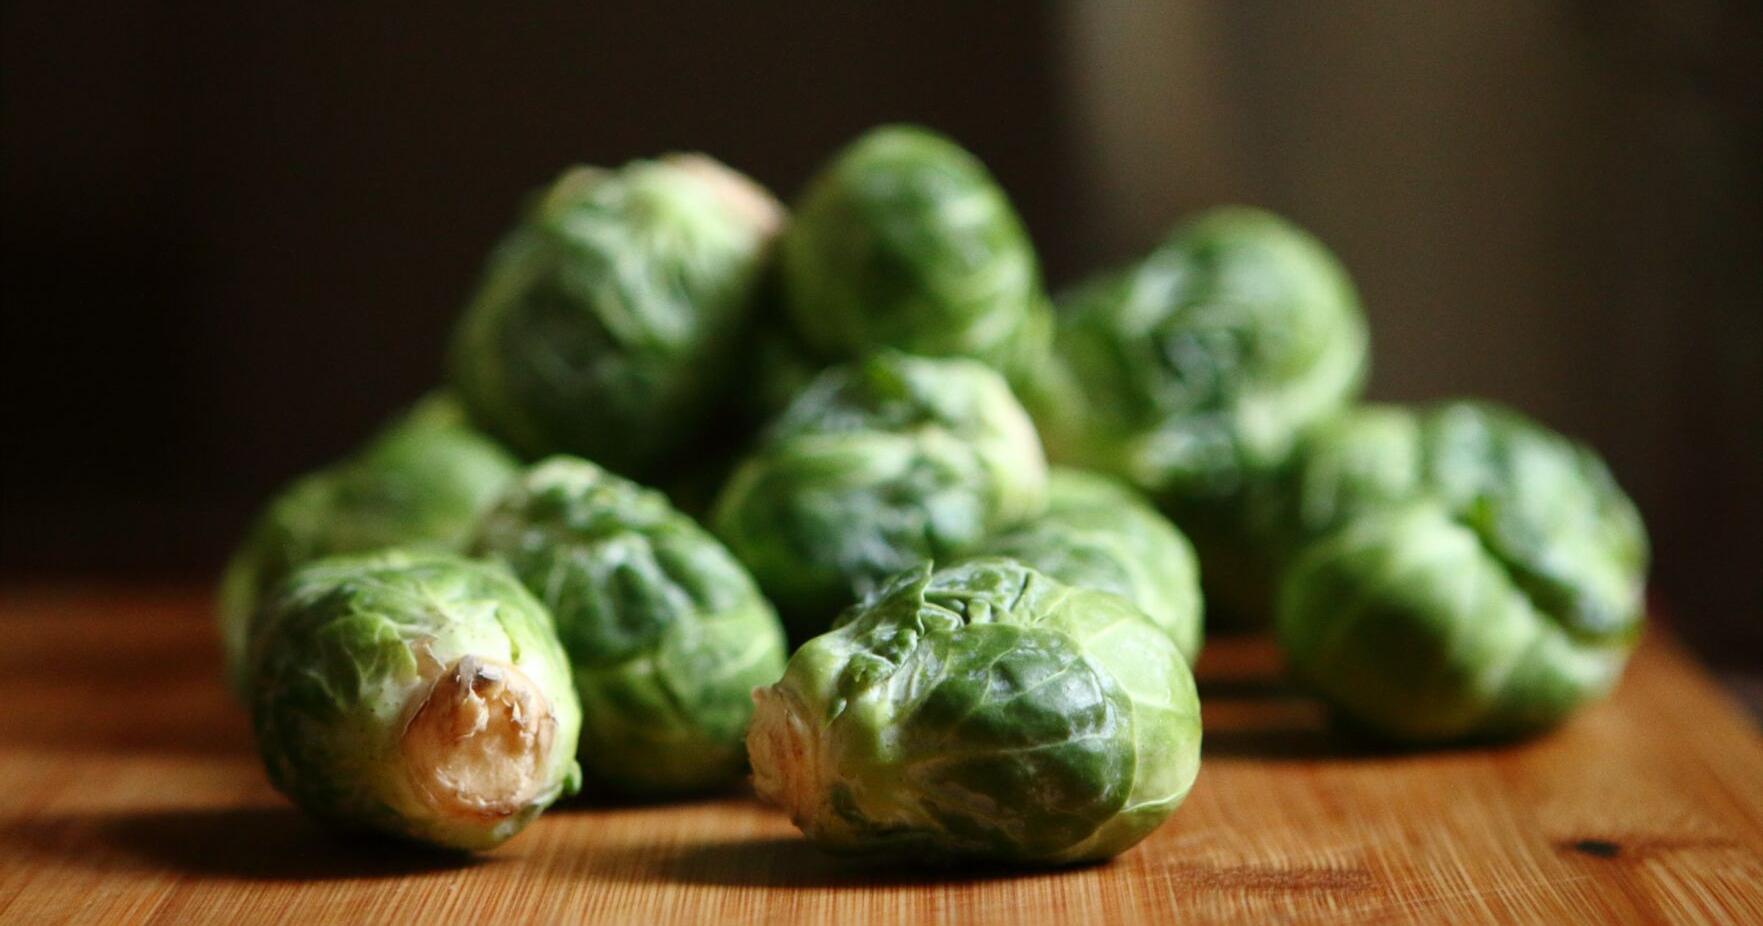 Tired of eating boiled, broiled, roasted or deep-fried Brussels sprouts? Shake things up with a ginger and cream sauce